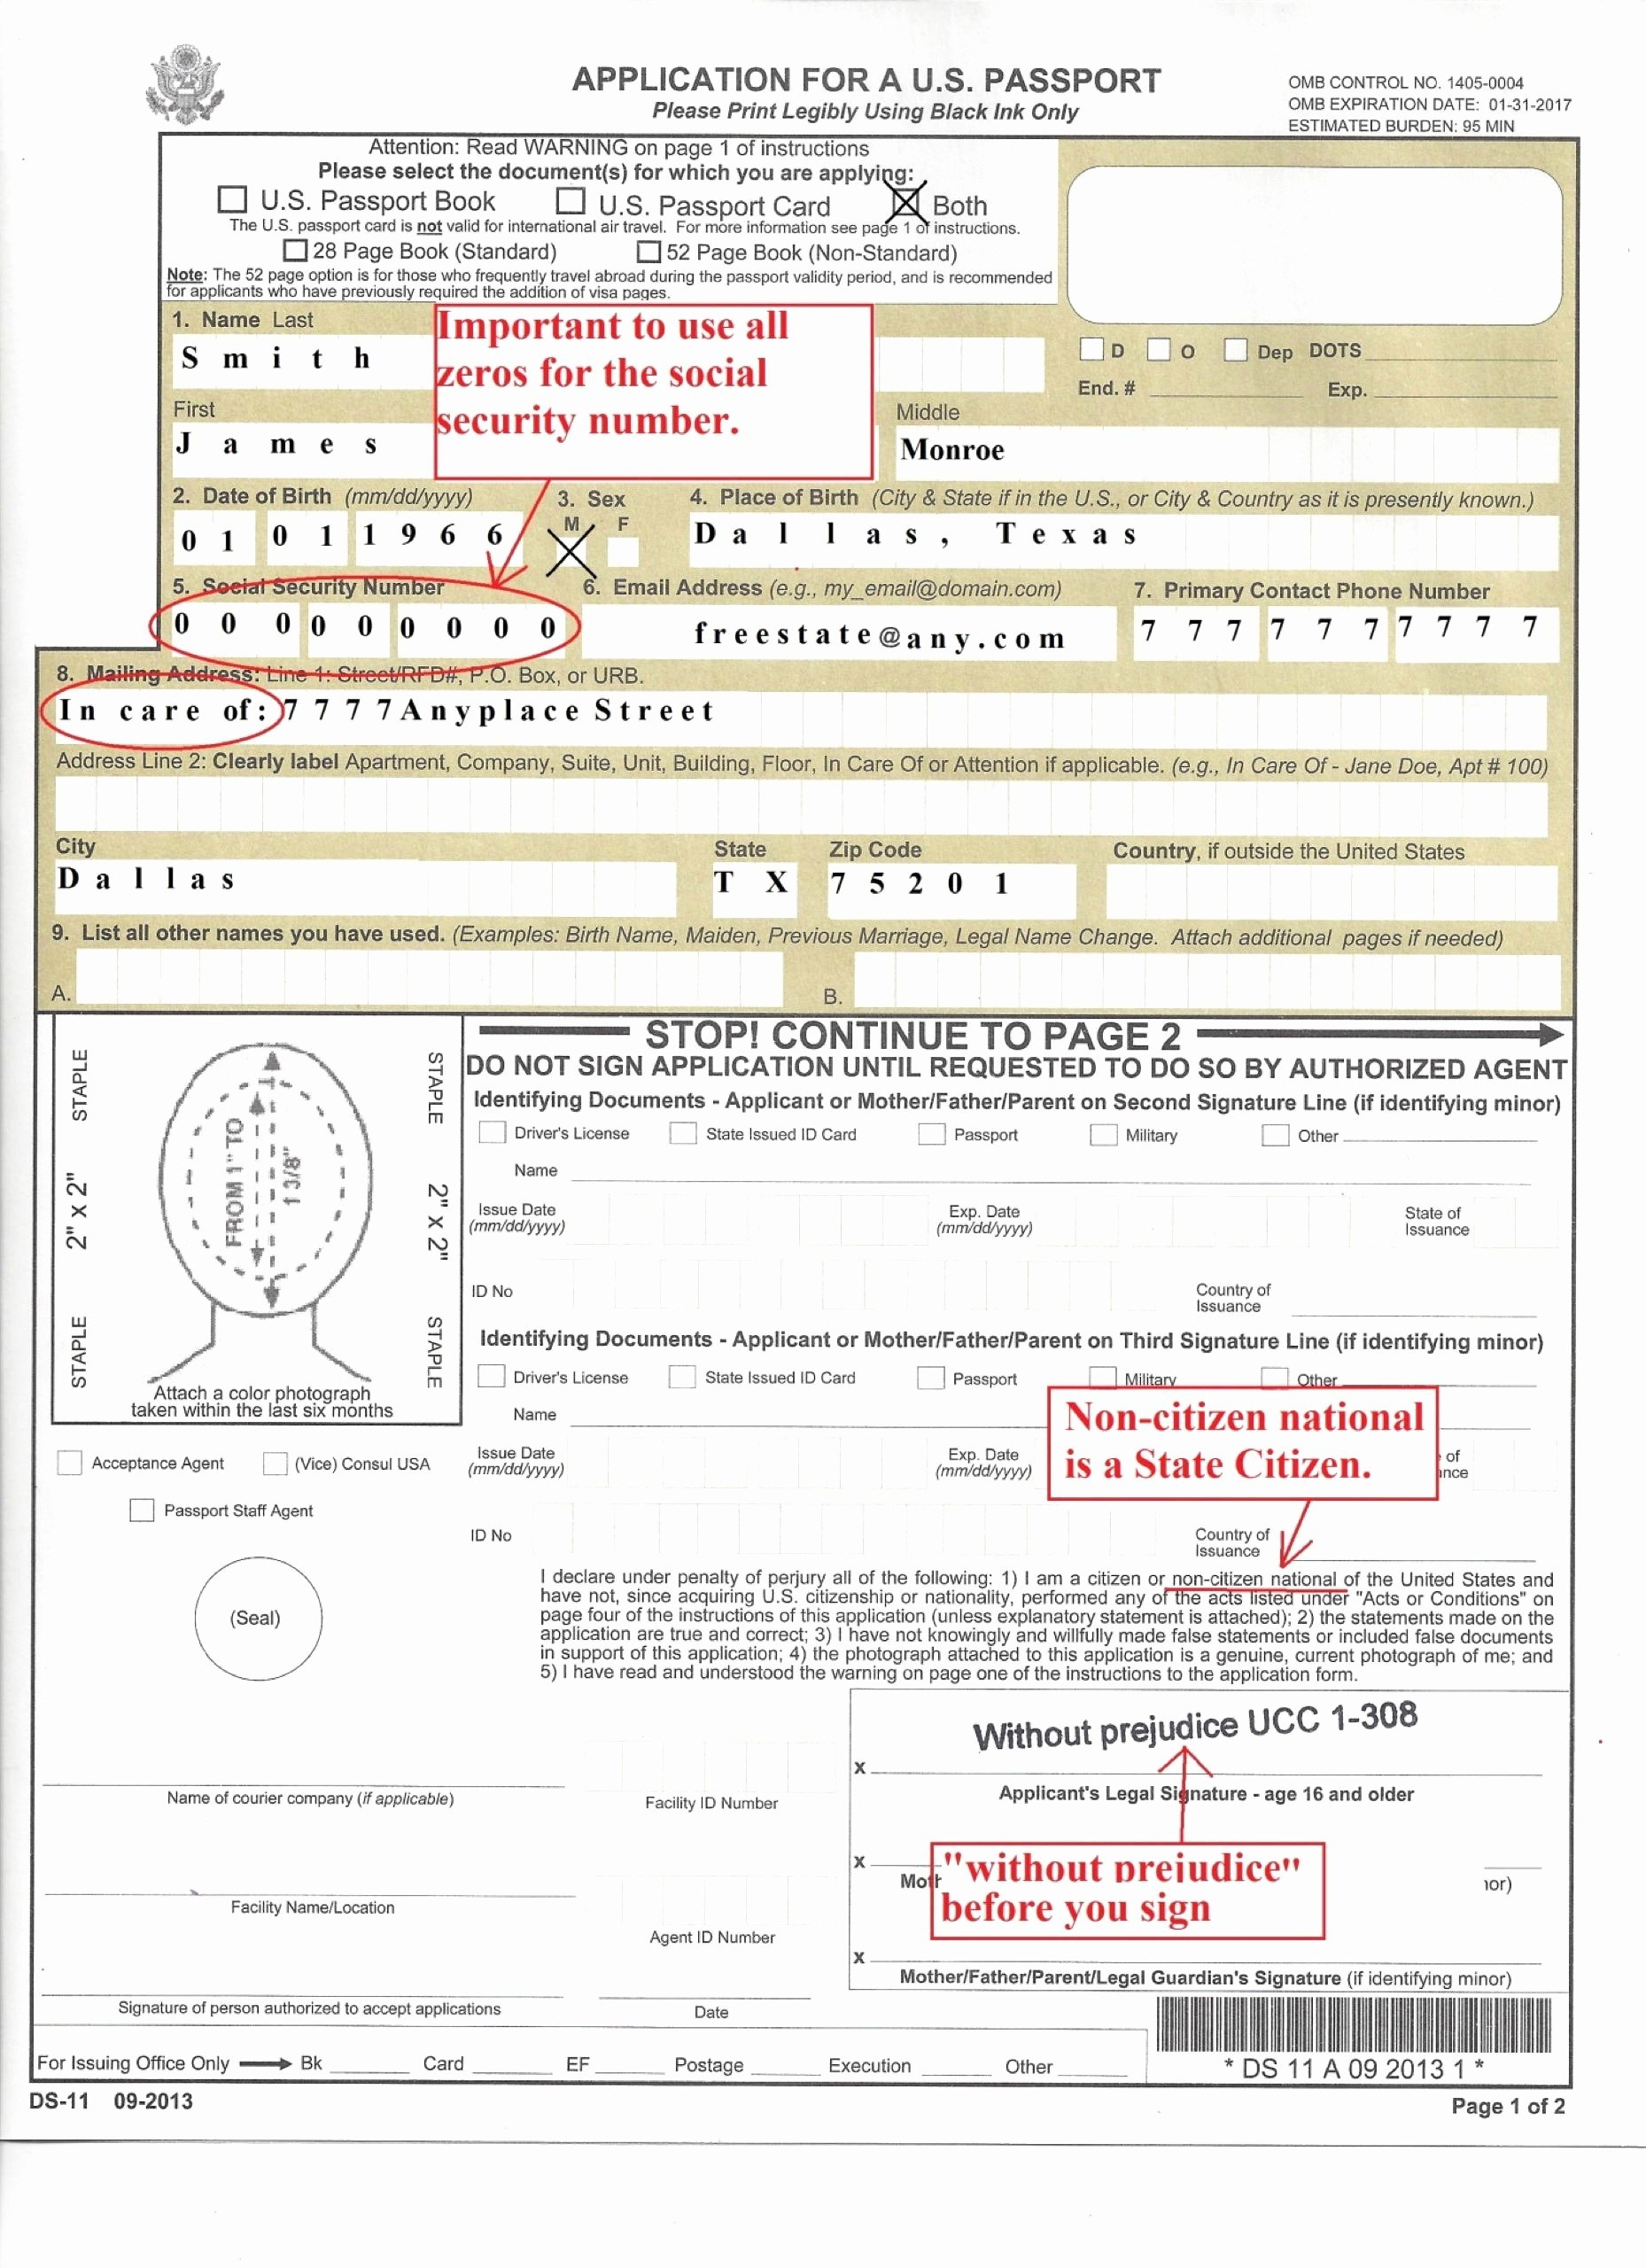 Passport Application Form Ds-11 – Printable Passport Form Best Of - Free Printable Ds 11